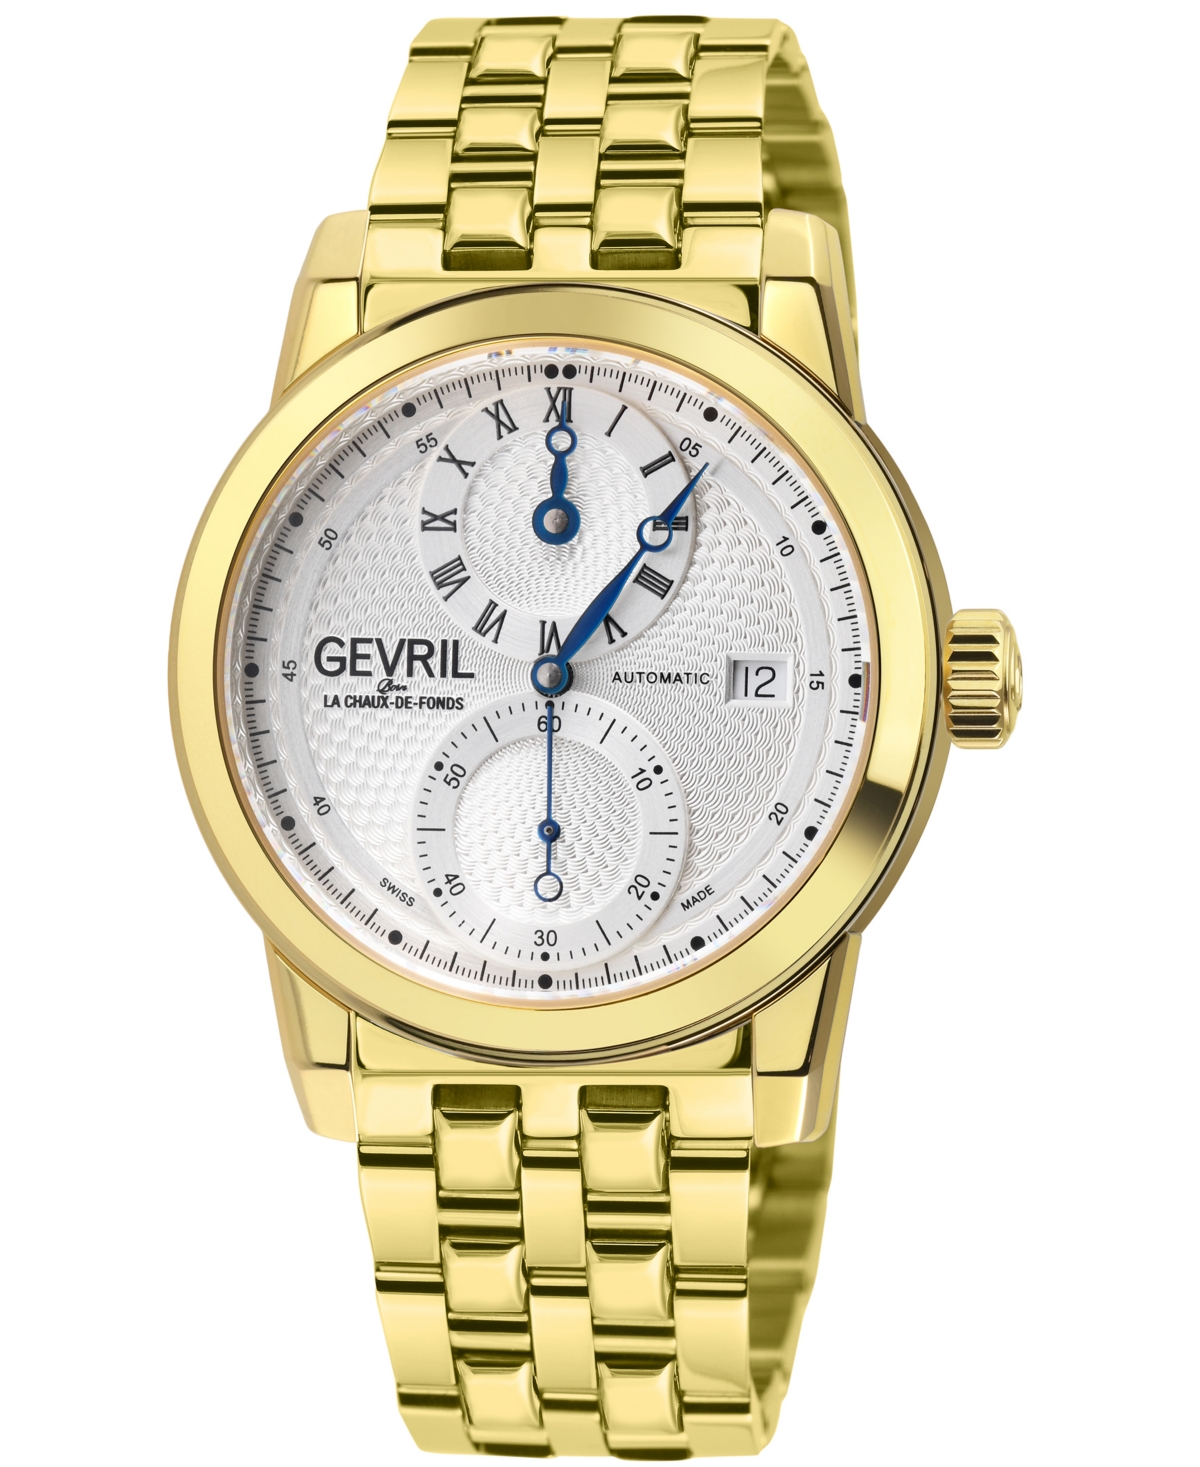 Gevril Gramercy Silver-tone Dial Mens Watch 24051b In Blue / Gold Tone / Silver / Yellow